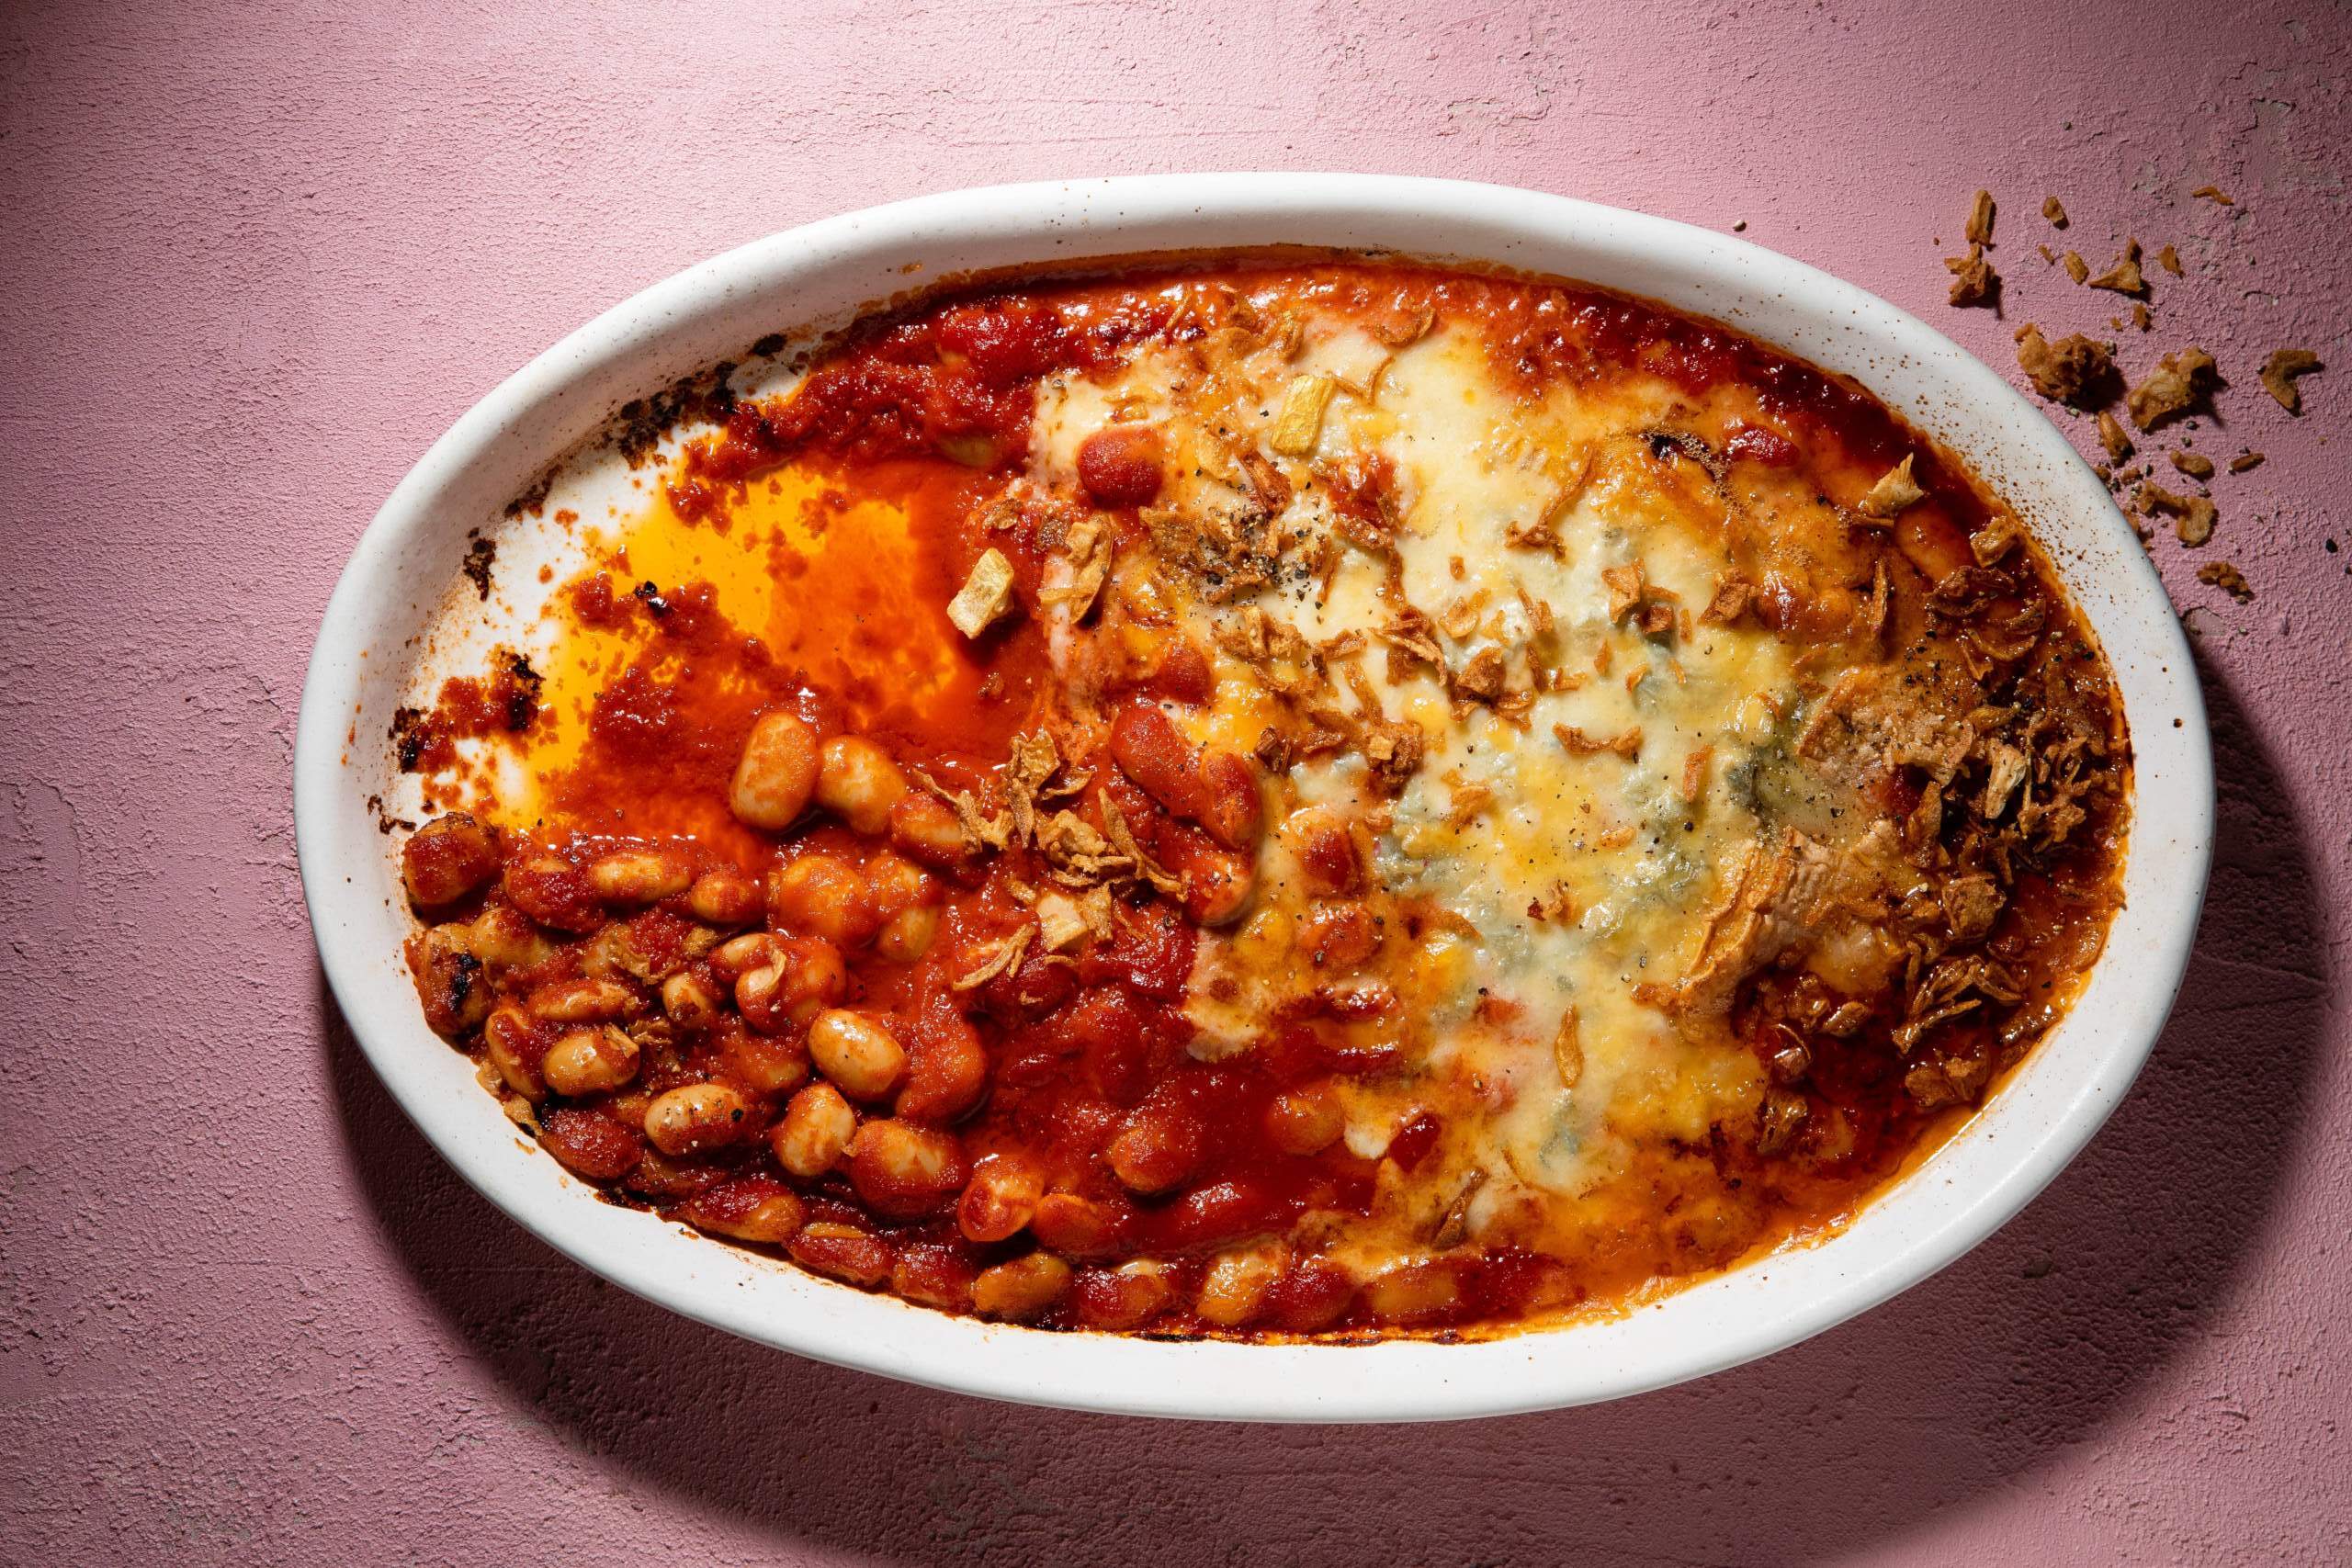 Home-made baked beans